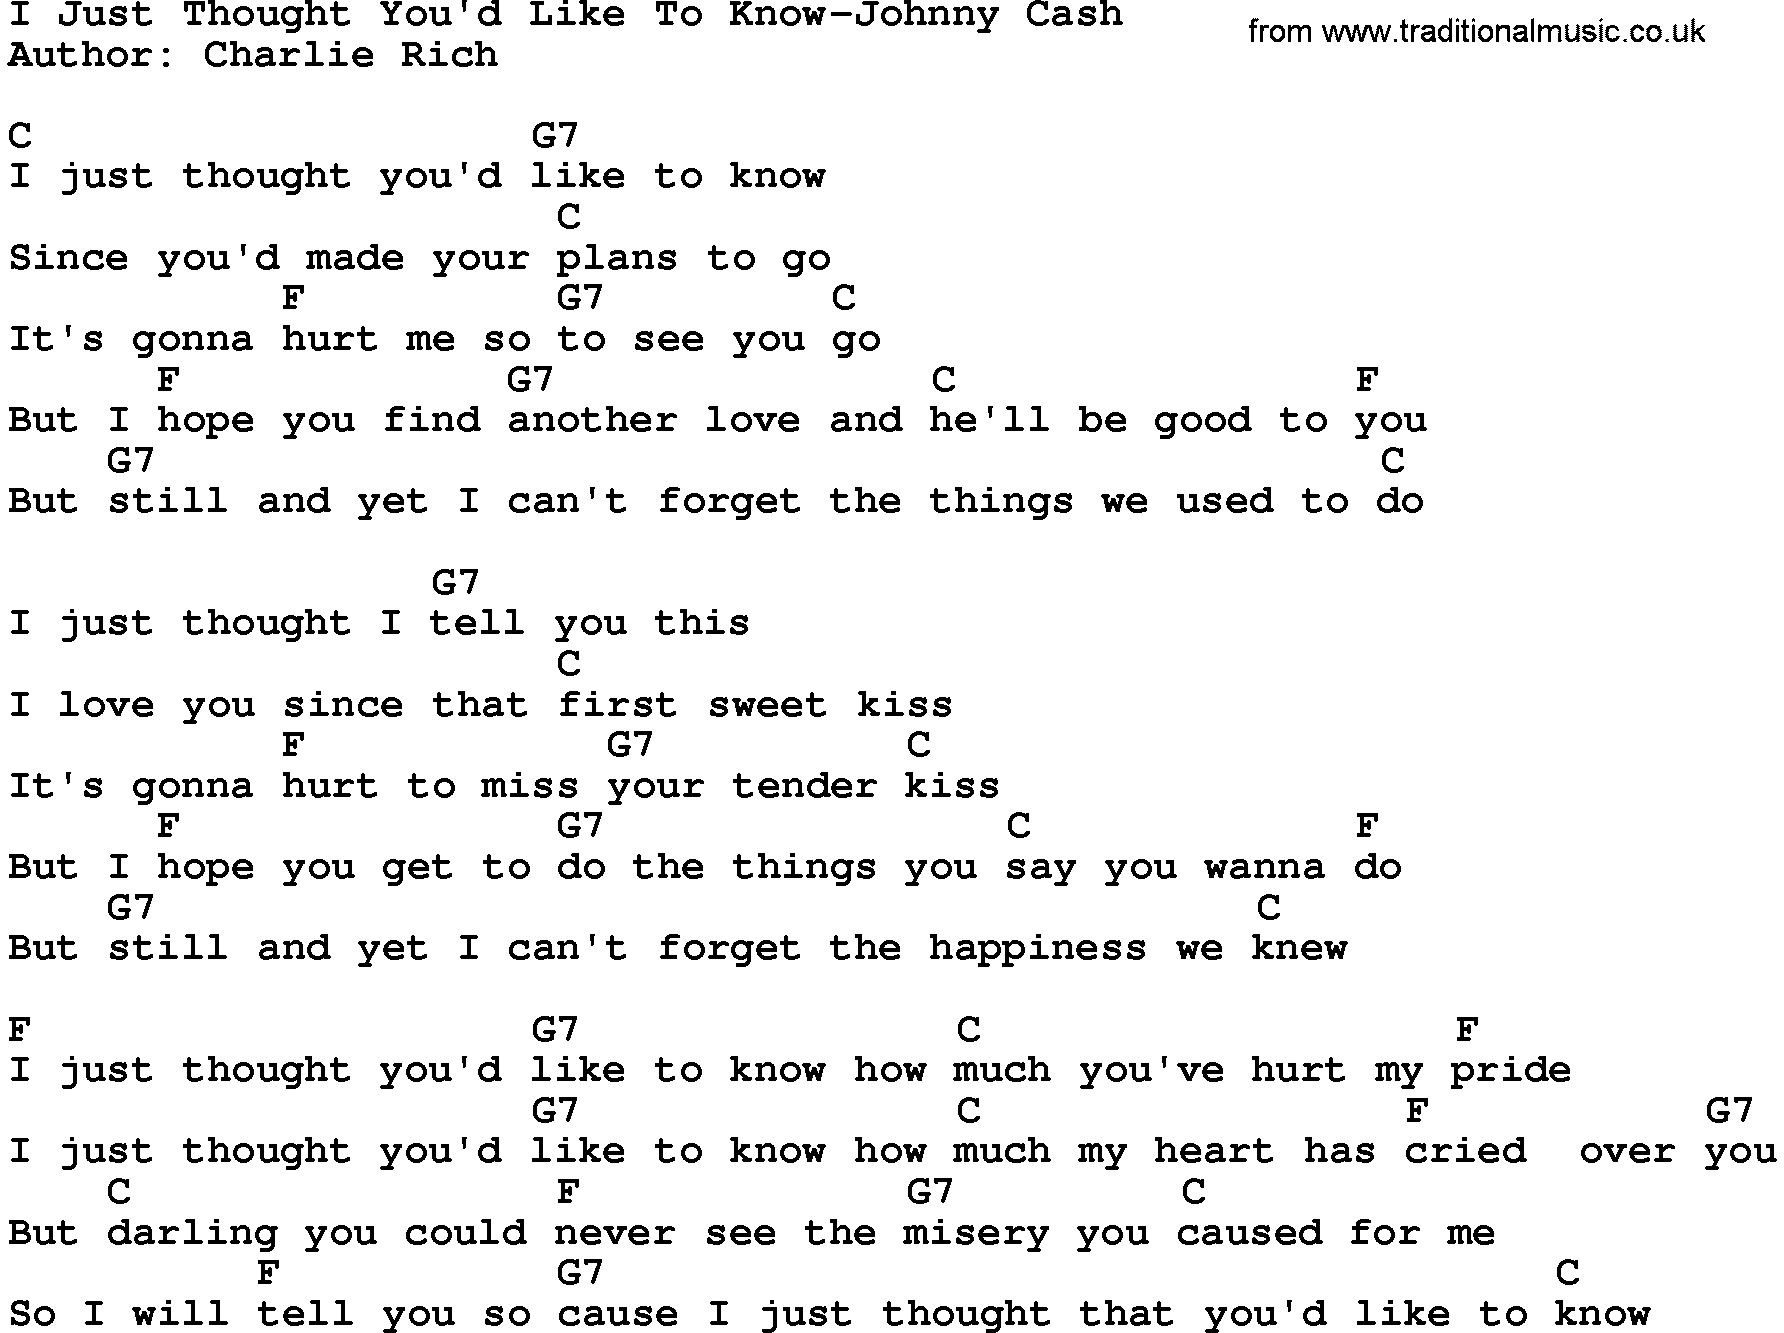 Country music song: I Just Thought You'd Like To Know-Johnny Cash lyrics and chords